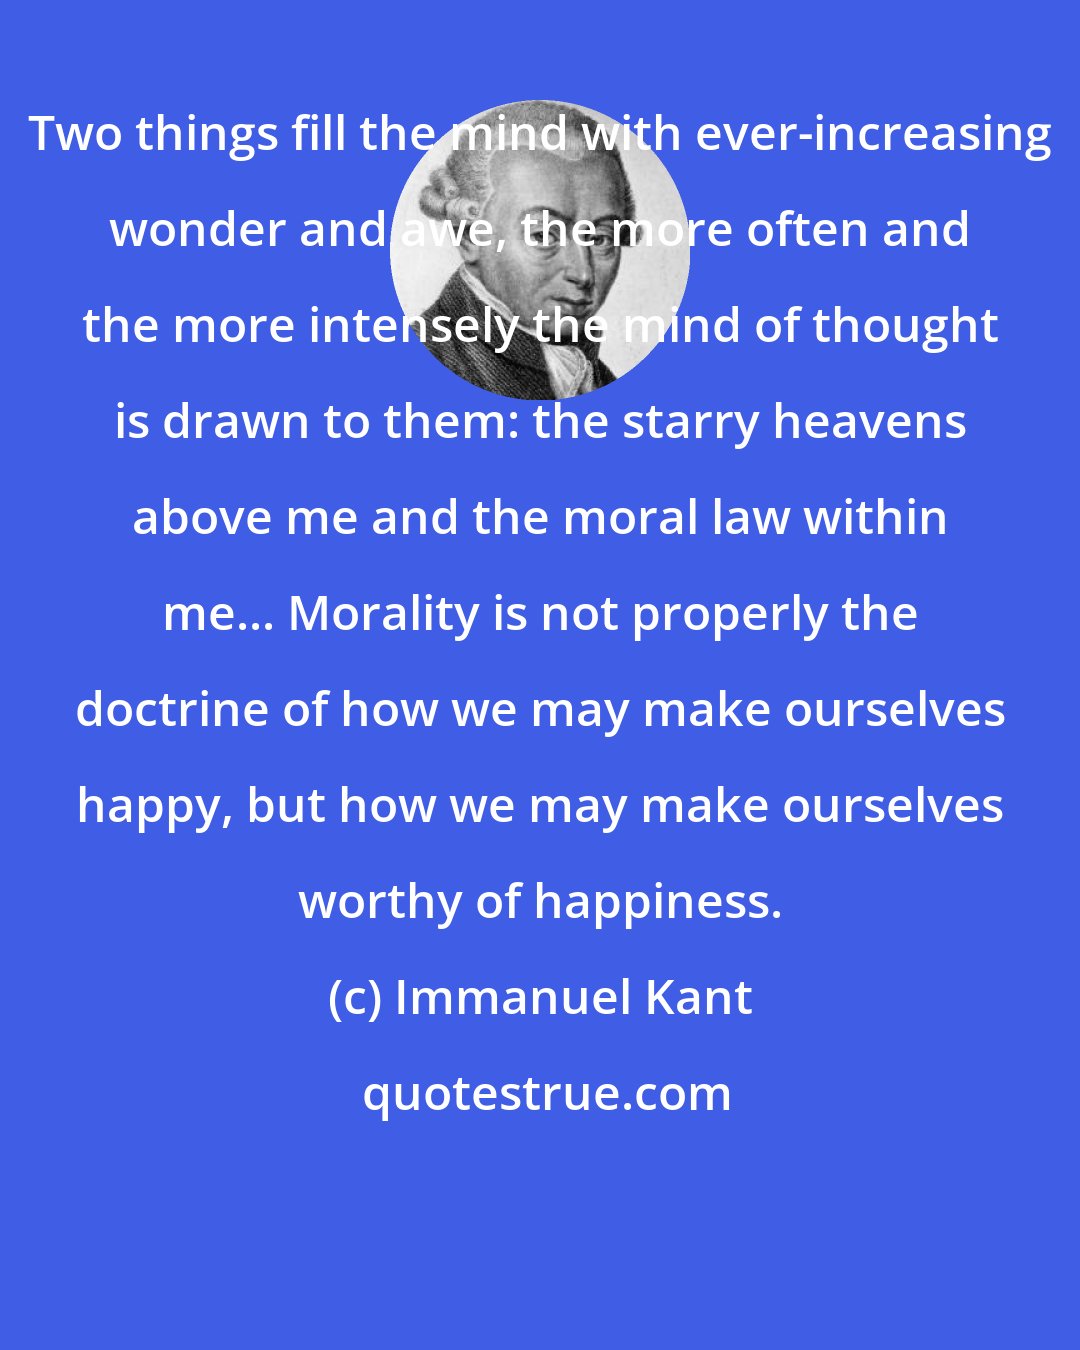 Immanuel Kant: Two things fill the mind with ever-increasing wonder and awe, the more often and the more intensely the mind of thought is drawn to them: the starry heavens above me and the moral law within me... Morality is not properly the doctrine of how we may make ourselves happy, but how we may make ourselves worthy of happiness.